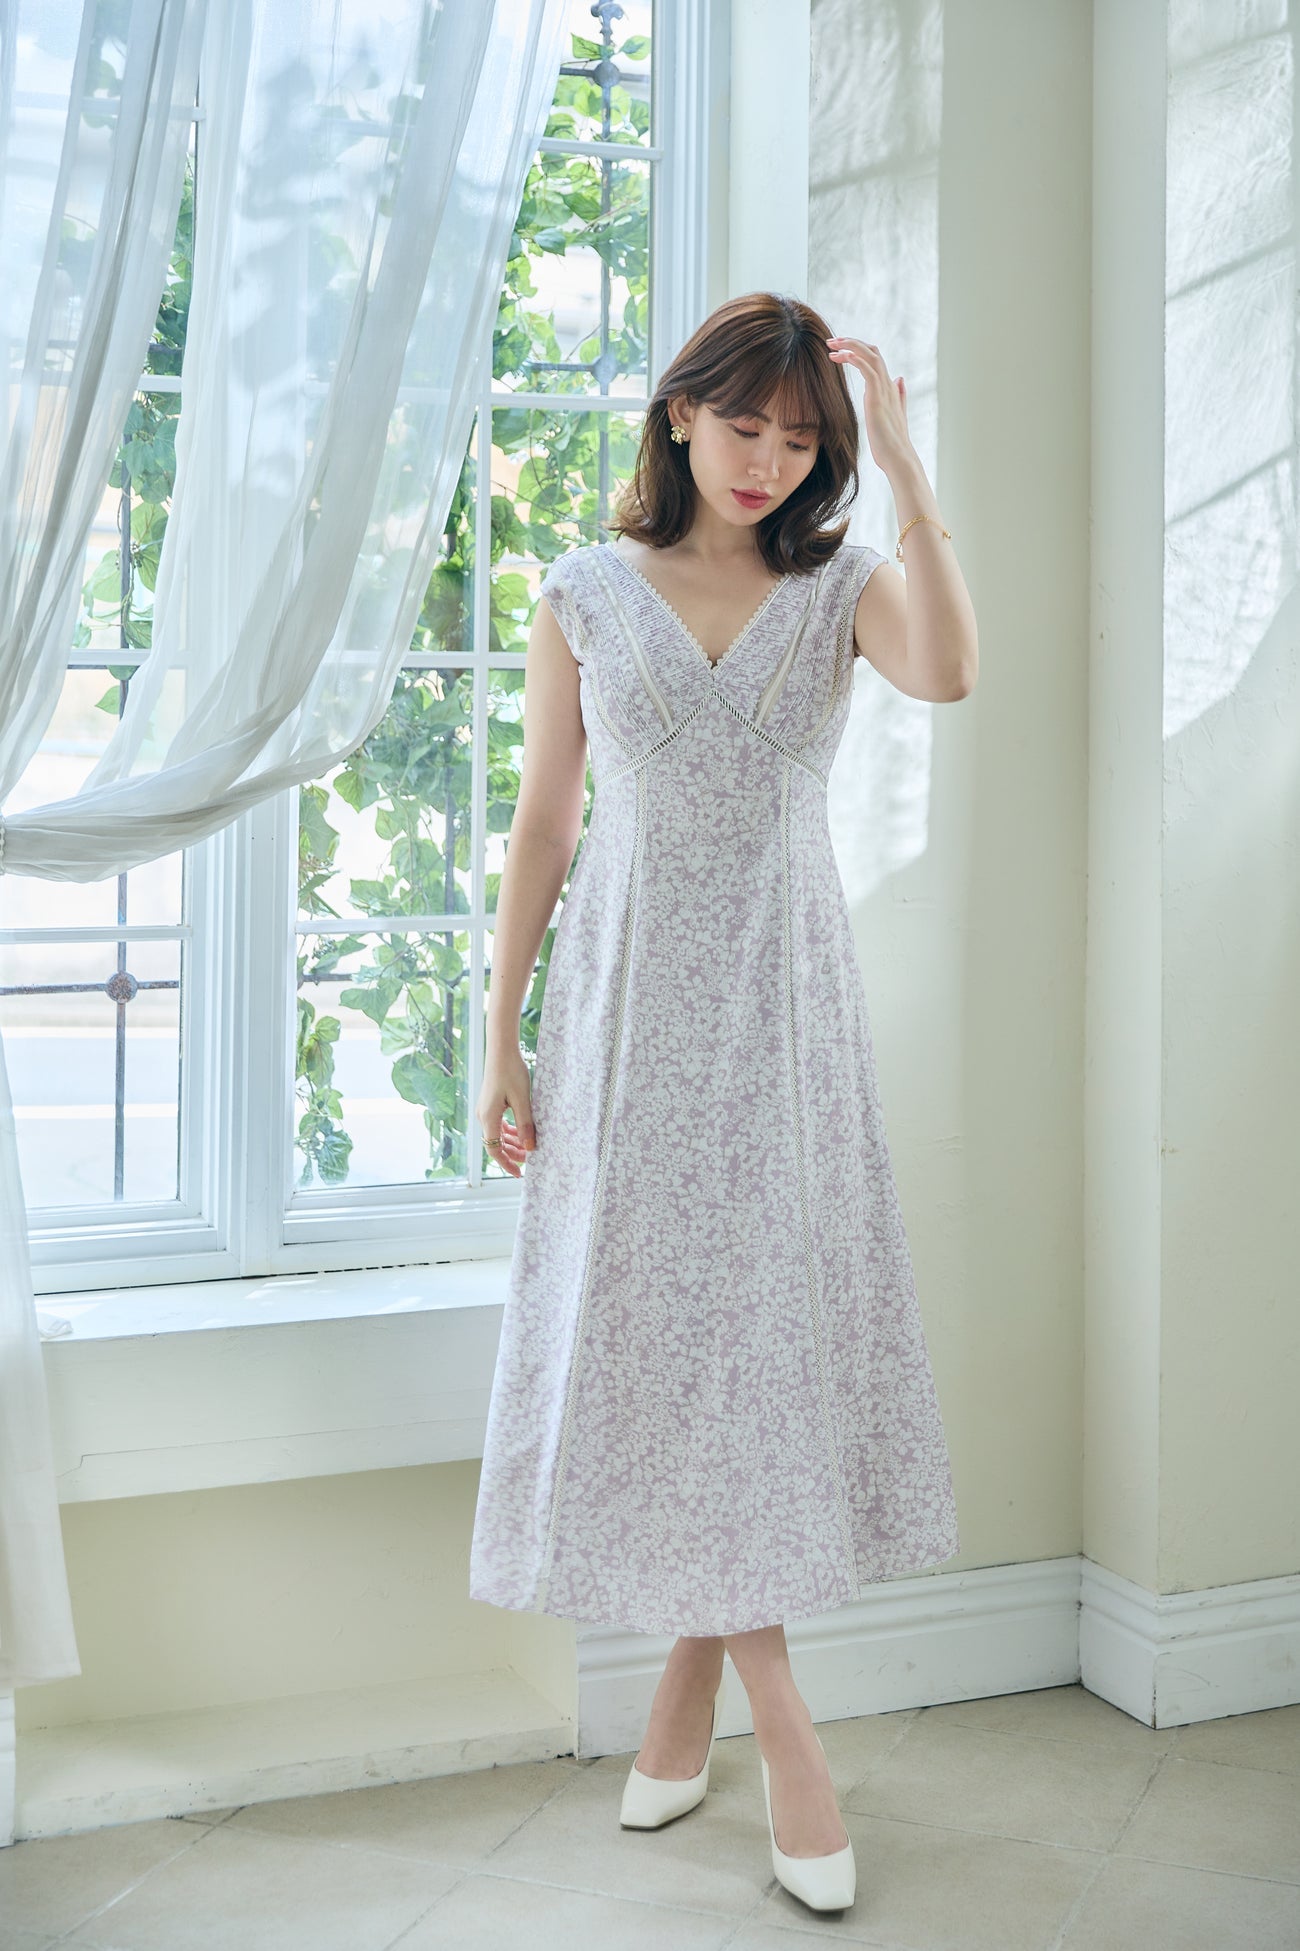 herlipto Lace Trimmed Floral Dressよろしくお願いします